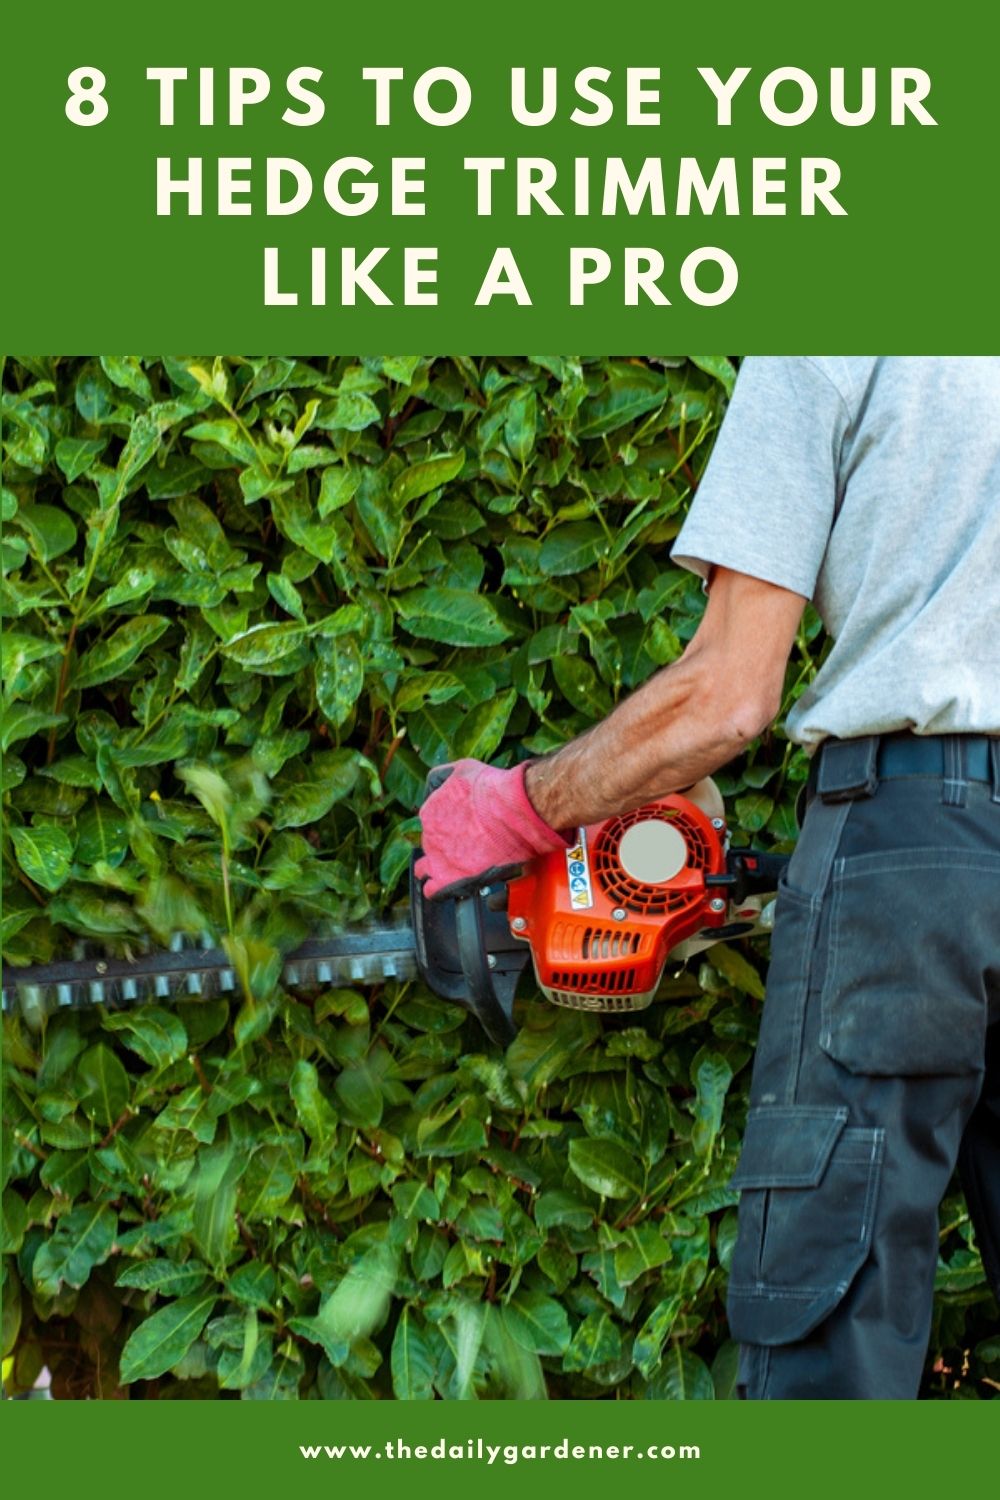 8 Tips to Use Your Hedge Trimmer like a Pro 2